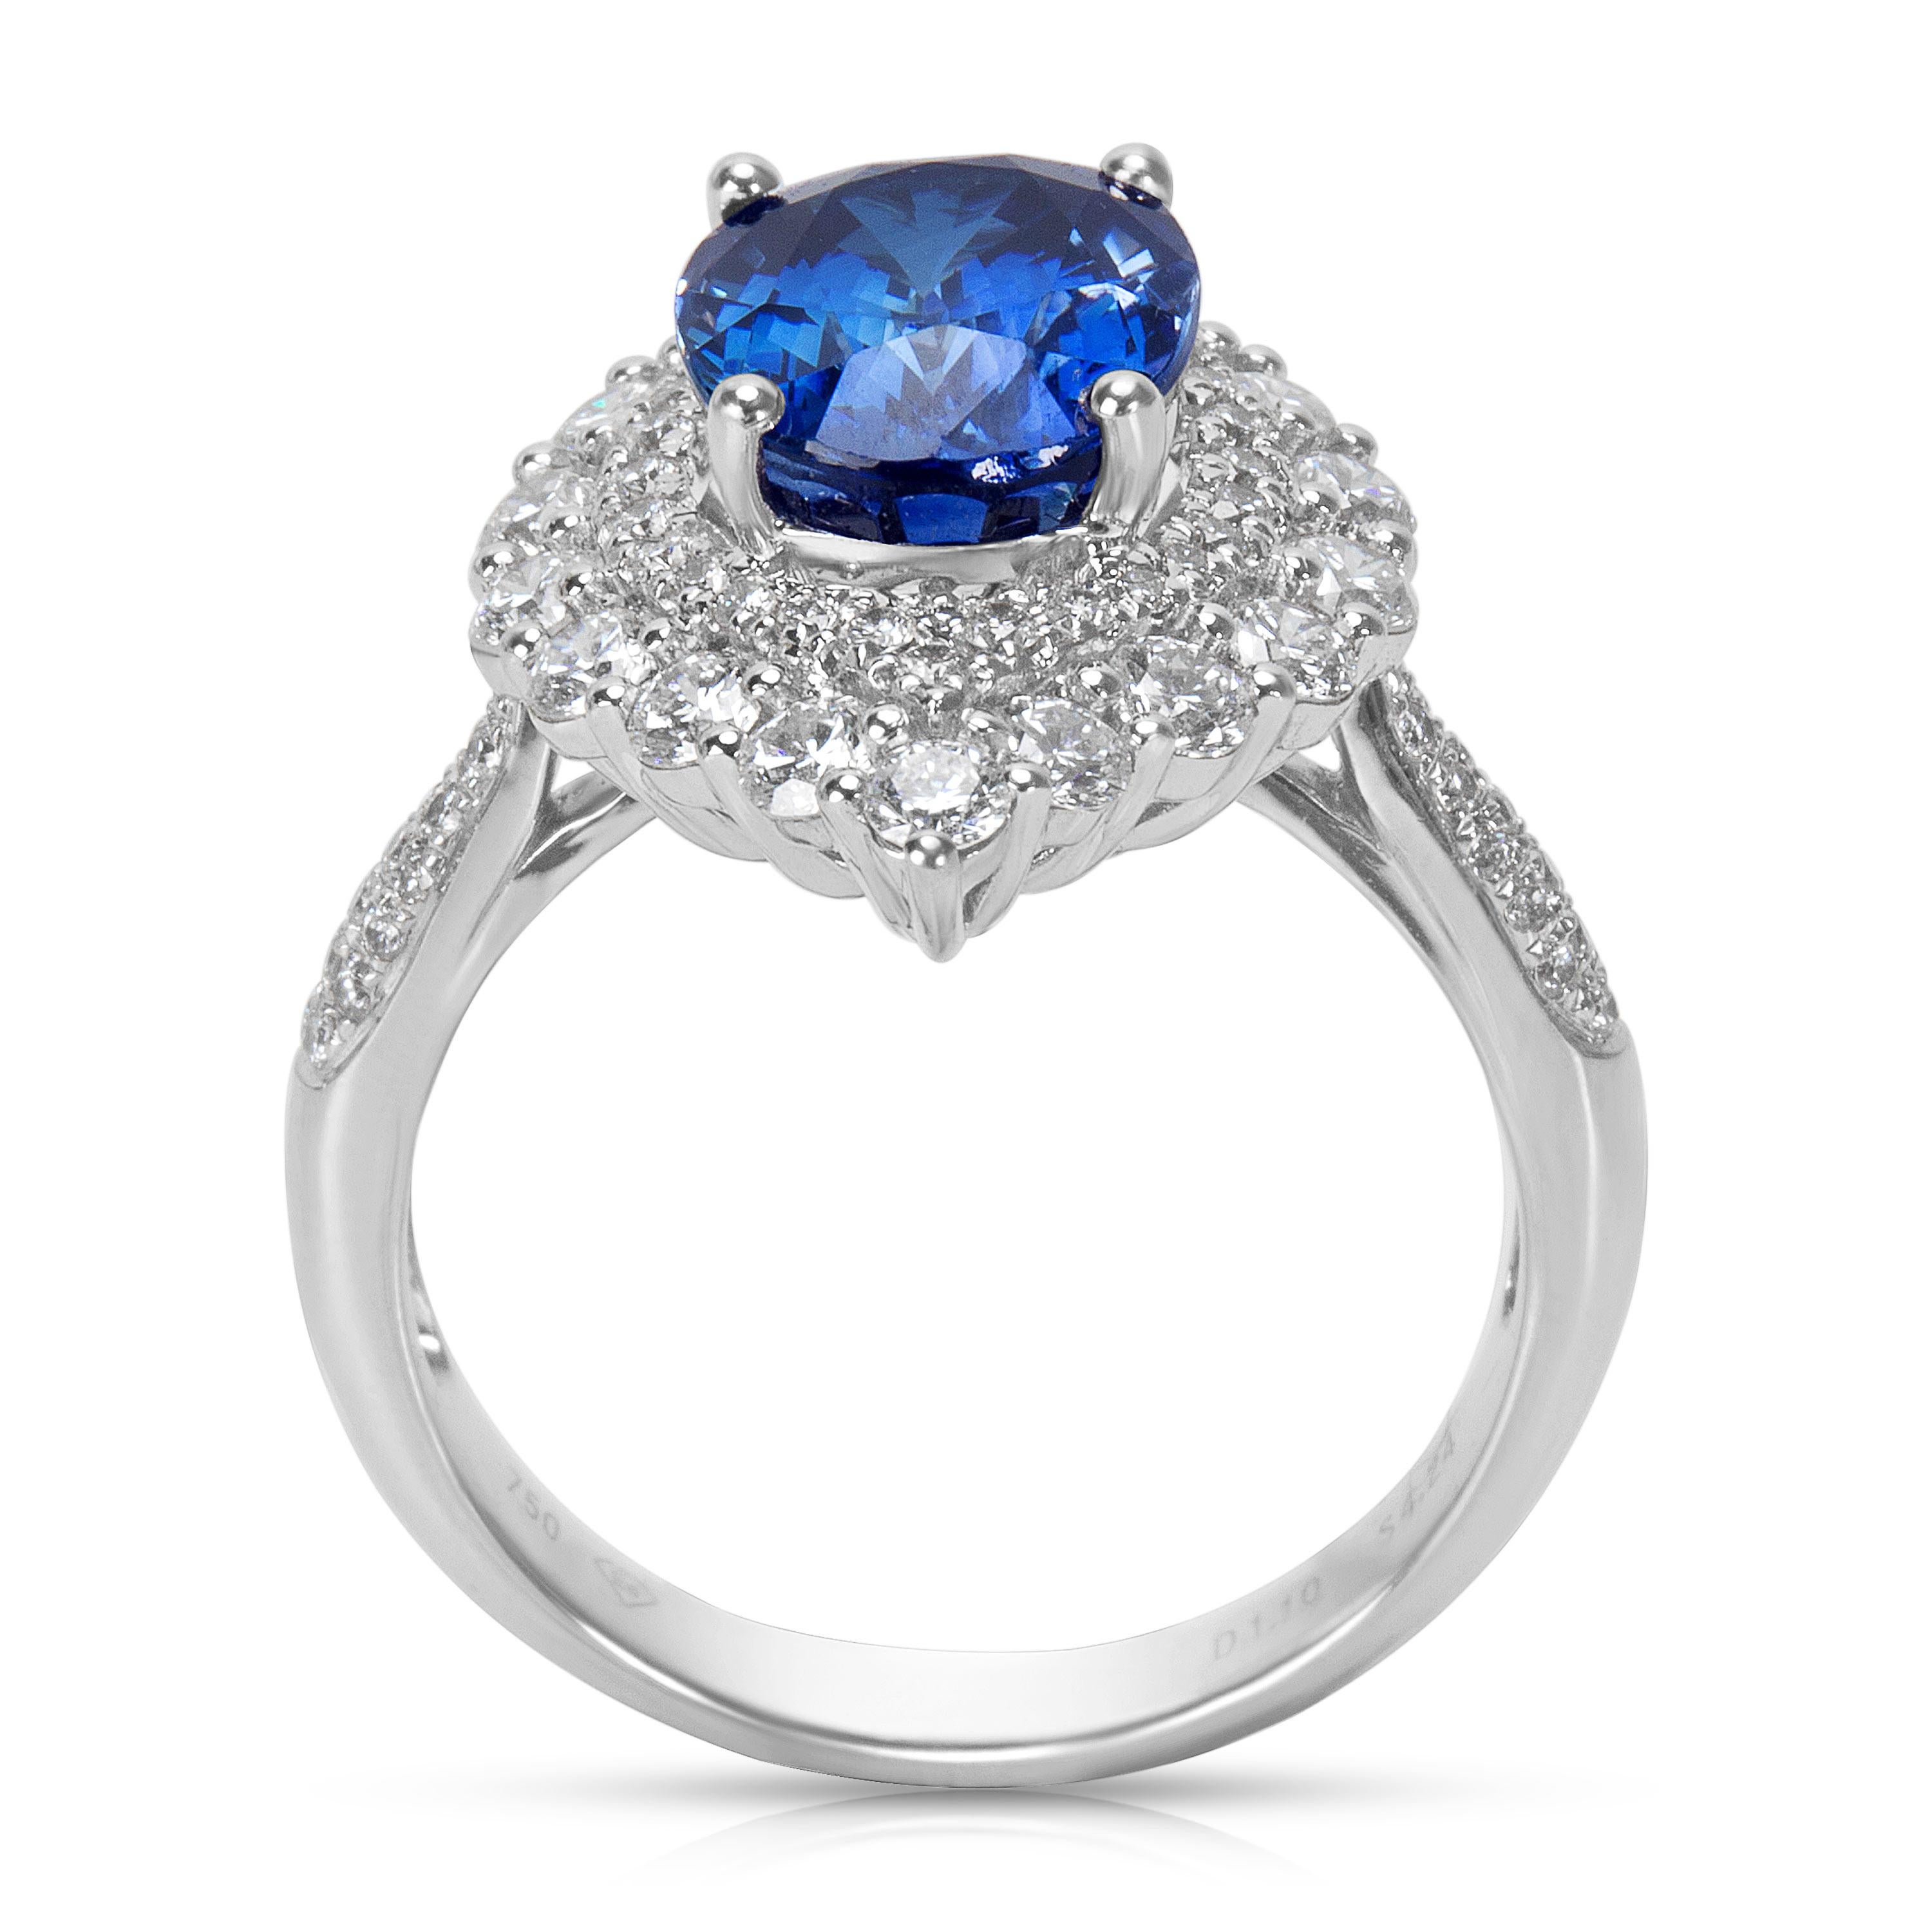 Oval Cut Halo Diamond and Oval Sapphire Ring in 18 Karat White Gold, 5.34 Carat